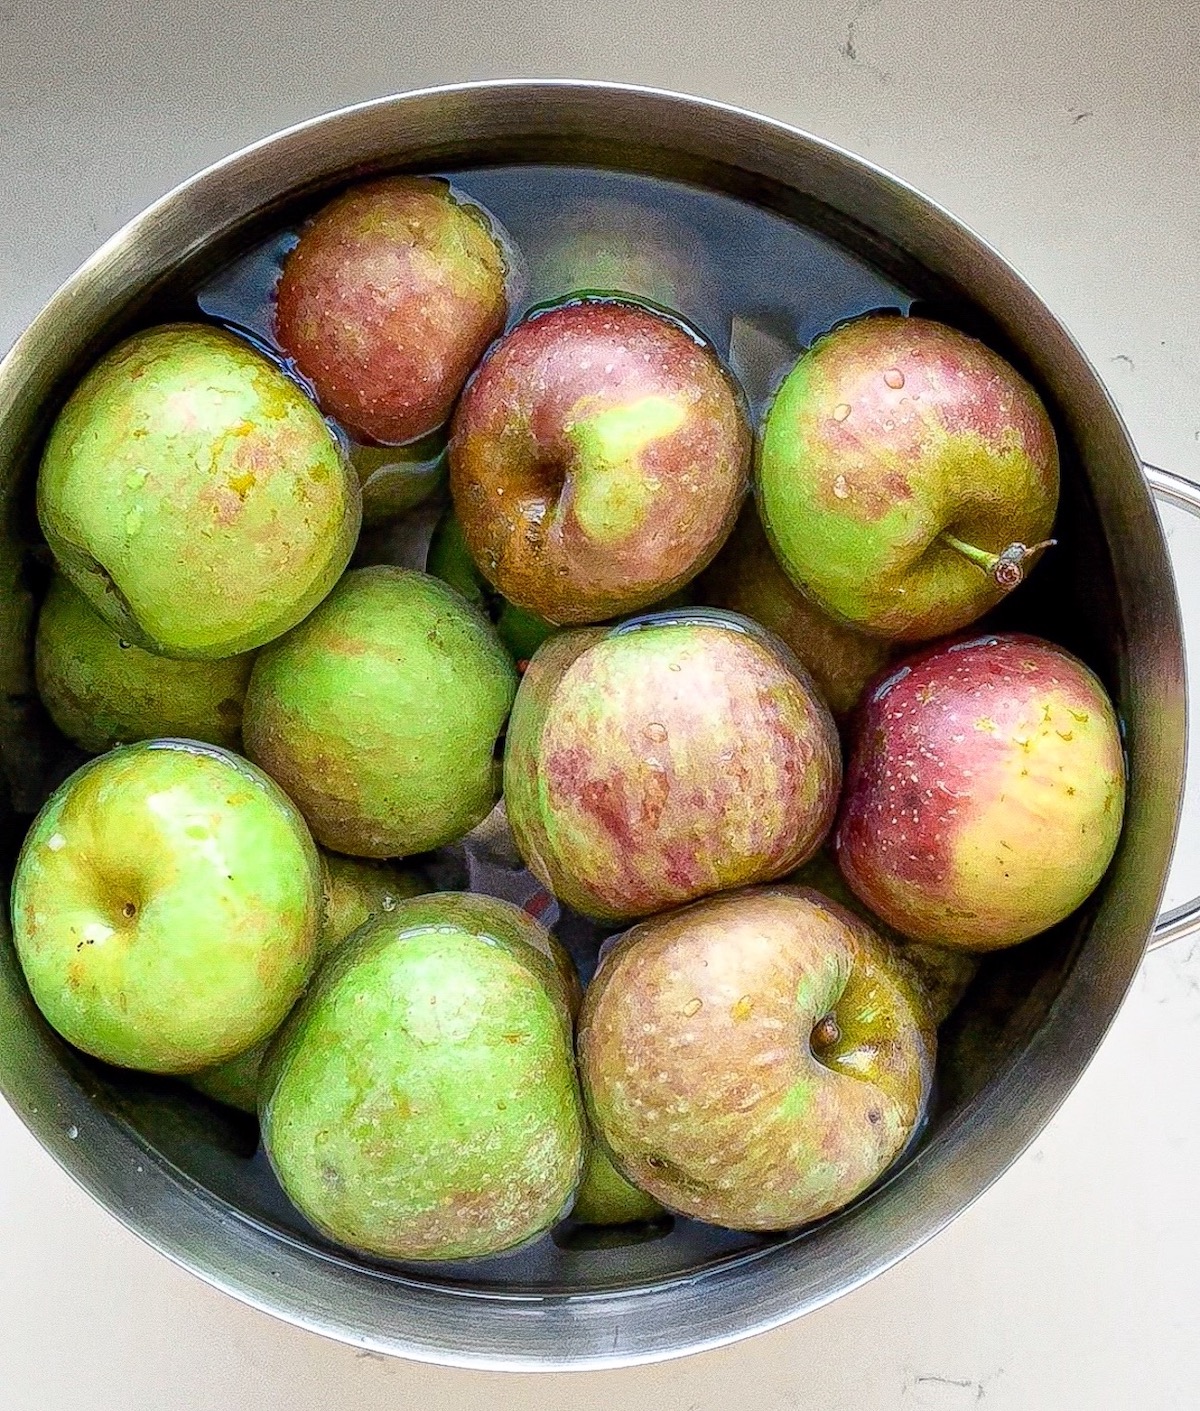 How to remove pesticides from apples: apples soaking in a solution of water and baking soda